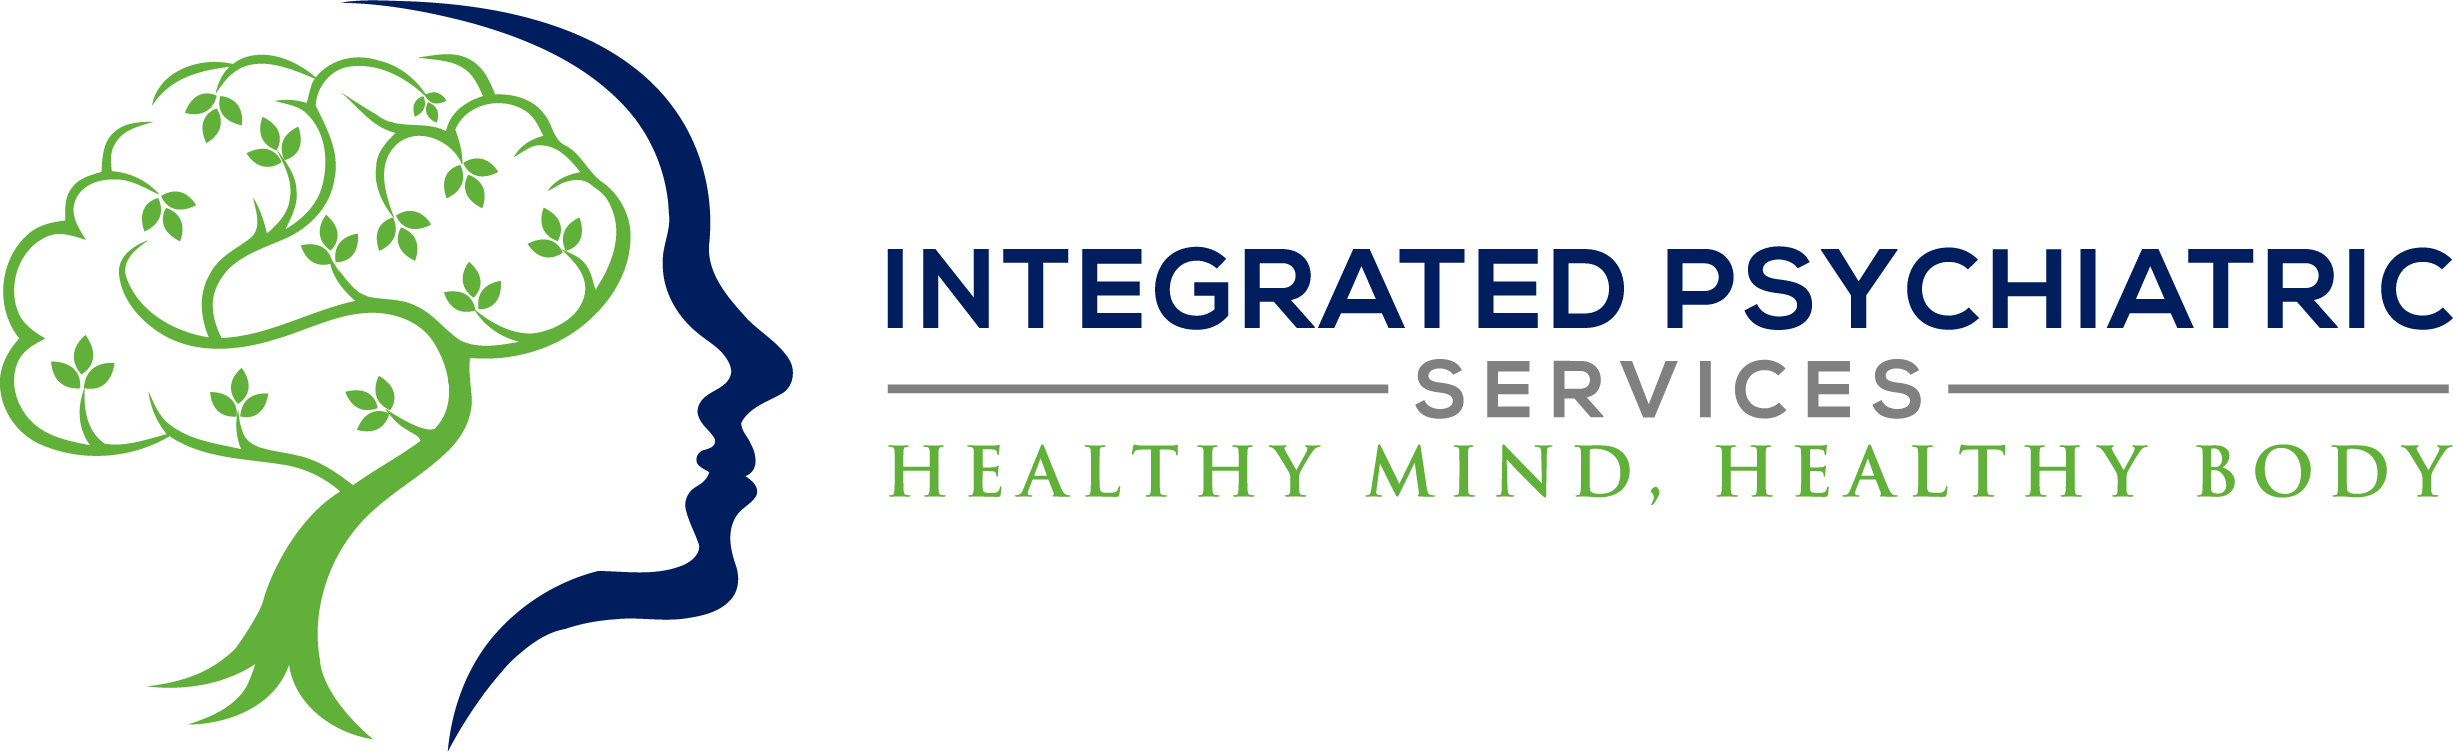 Integrated Psychiatric Services